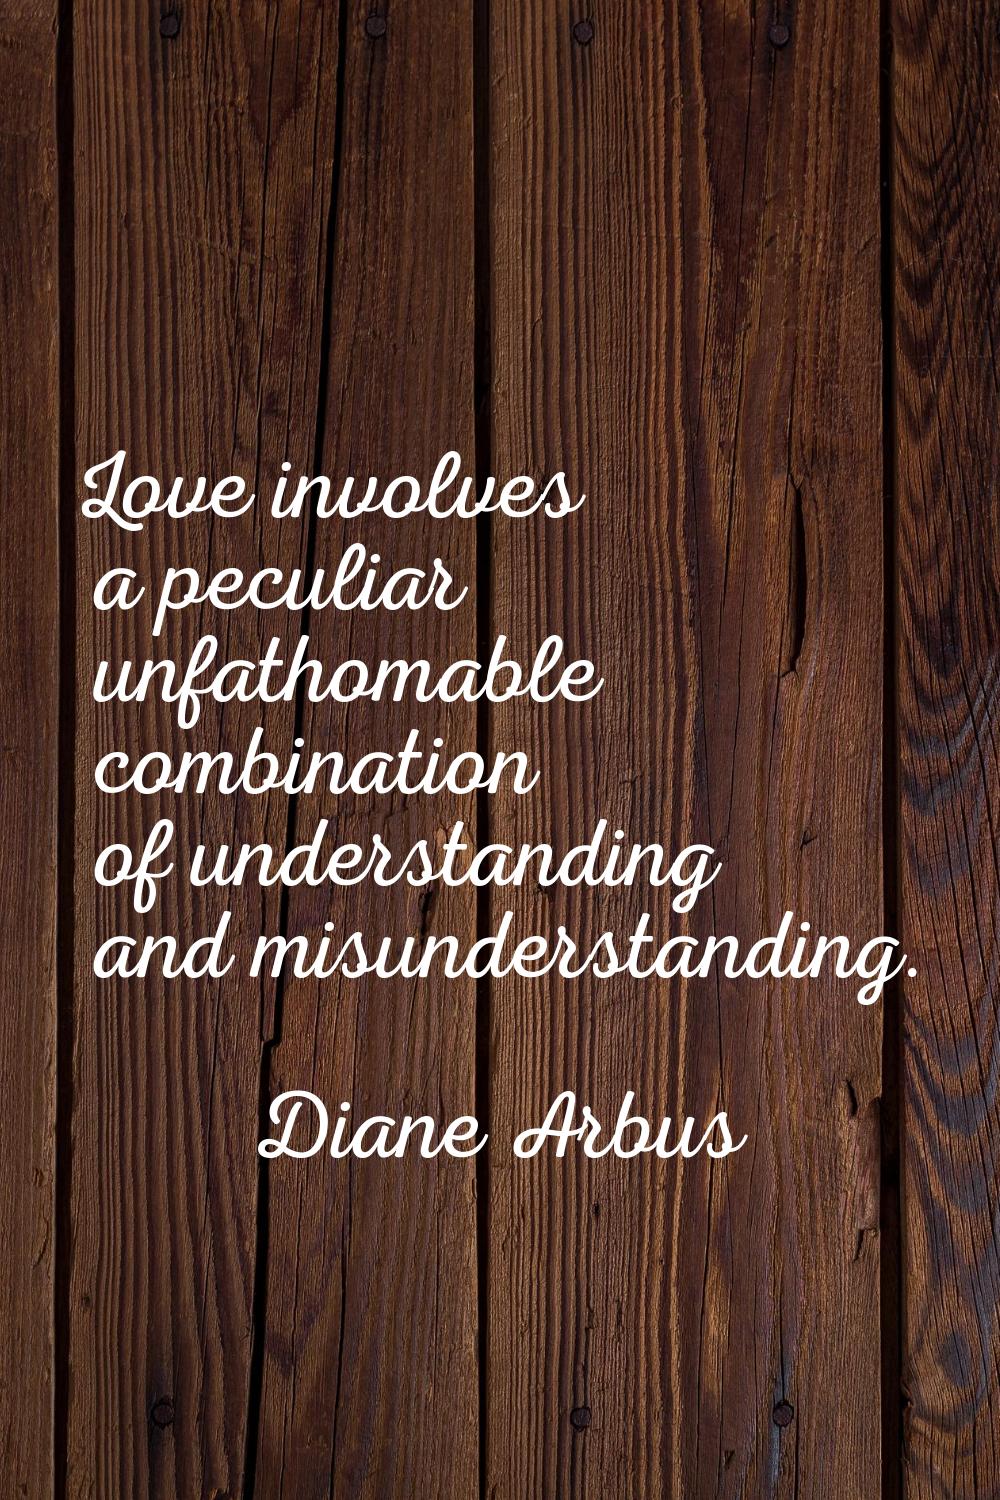 Love involves a peculiar unfathomable combination of understanding and misunderstanding.